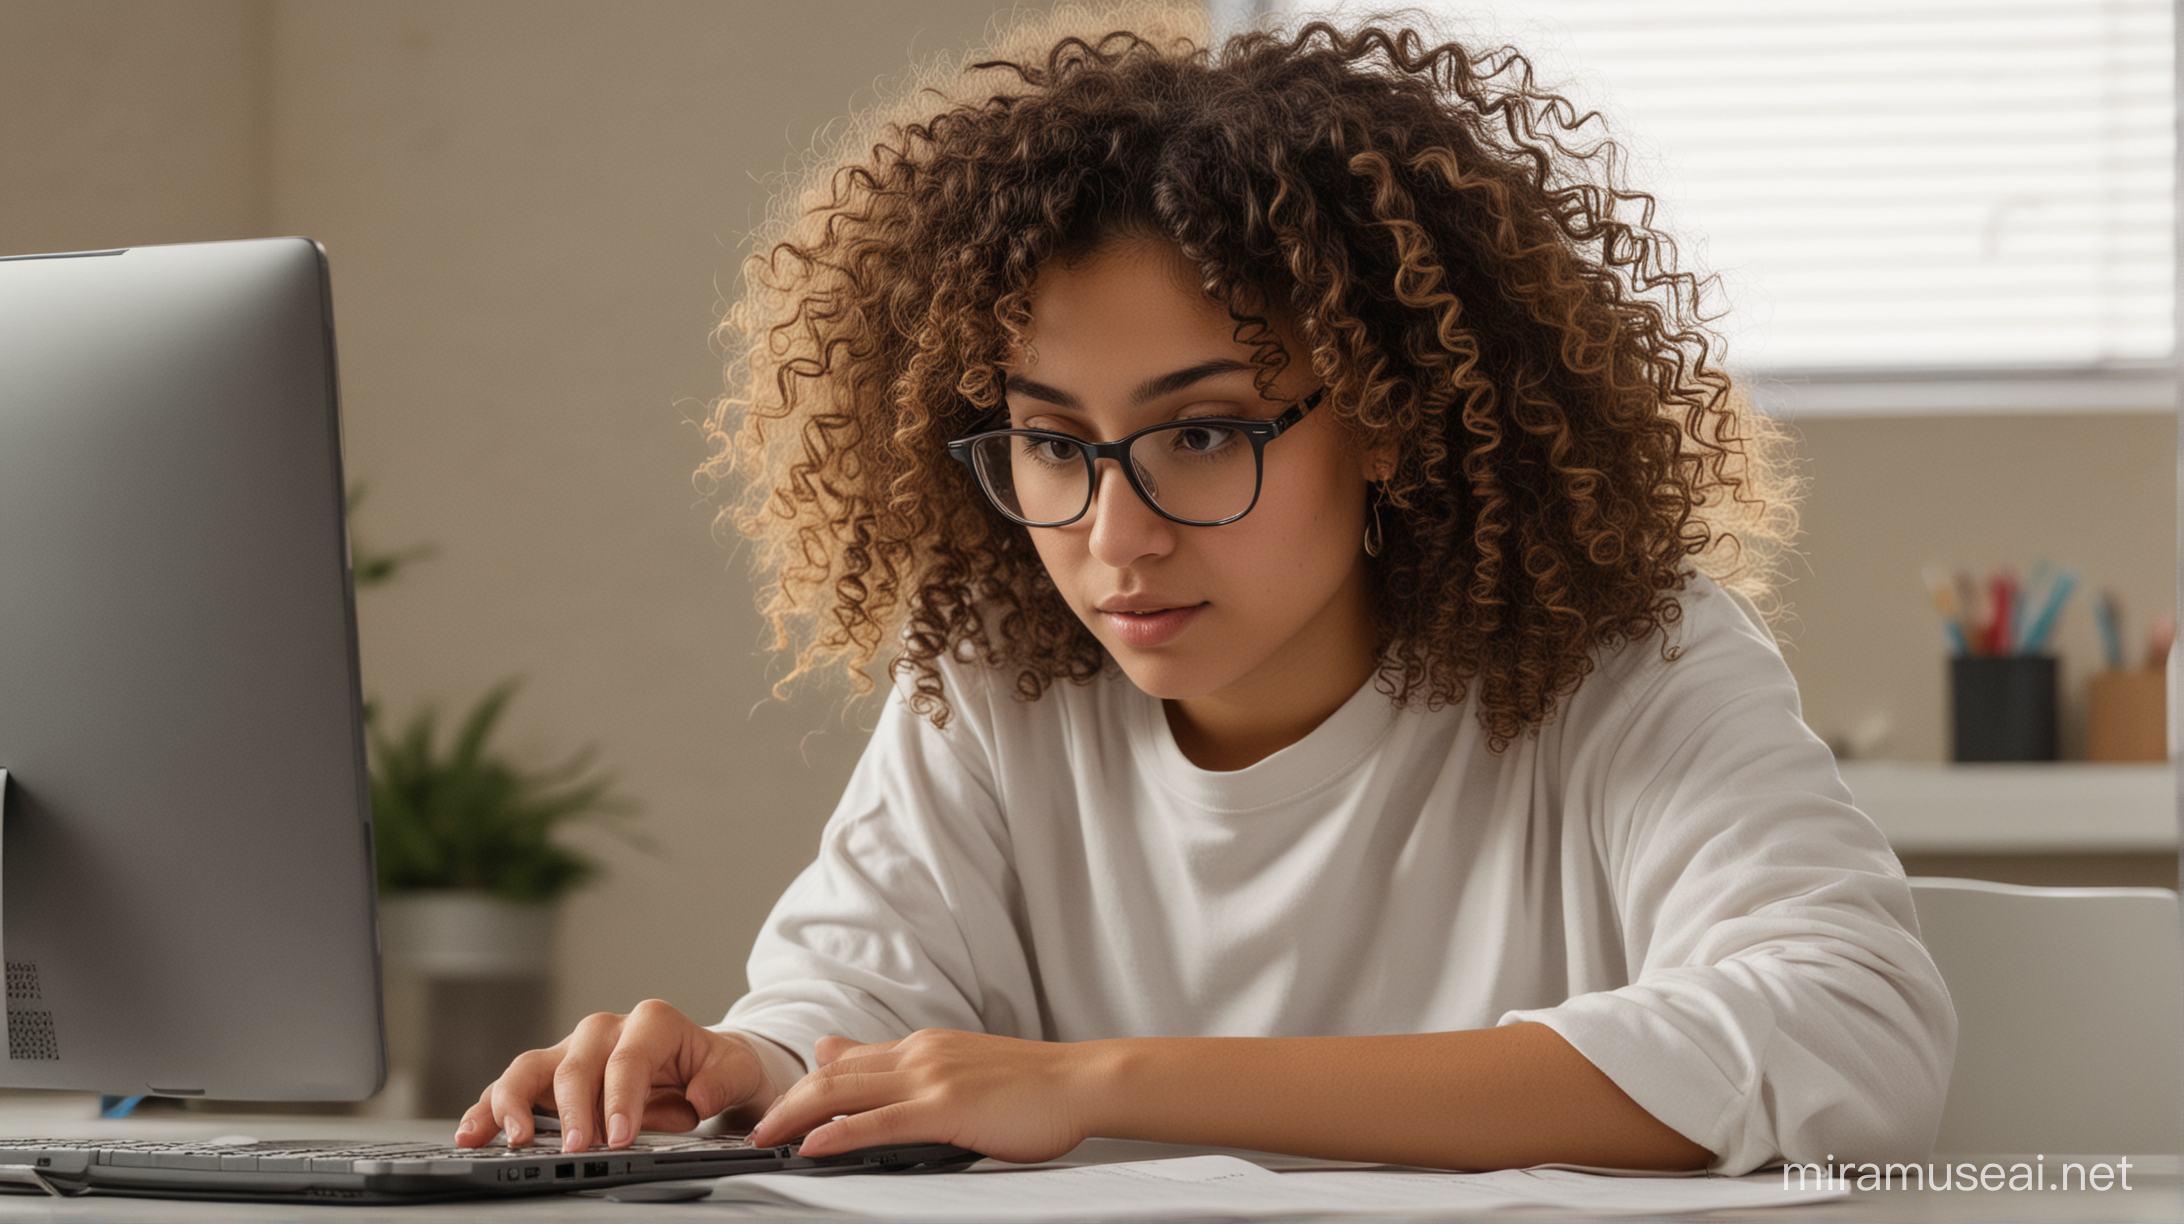 Latina Girl with Curly Hair Studying on Computer